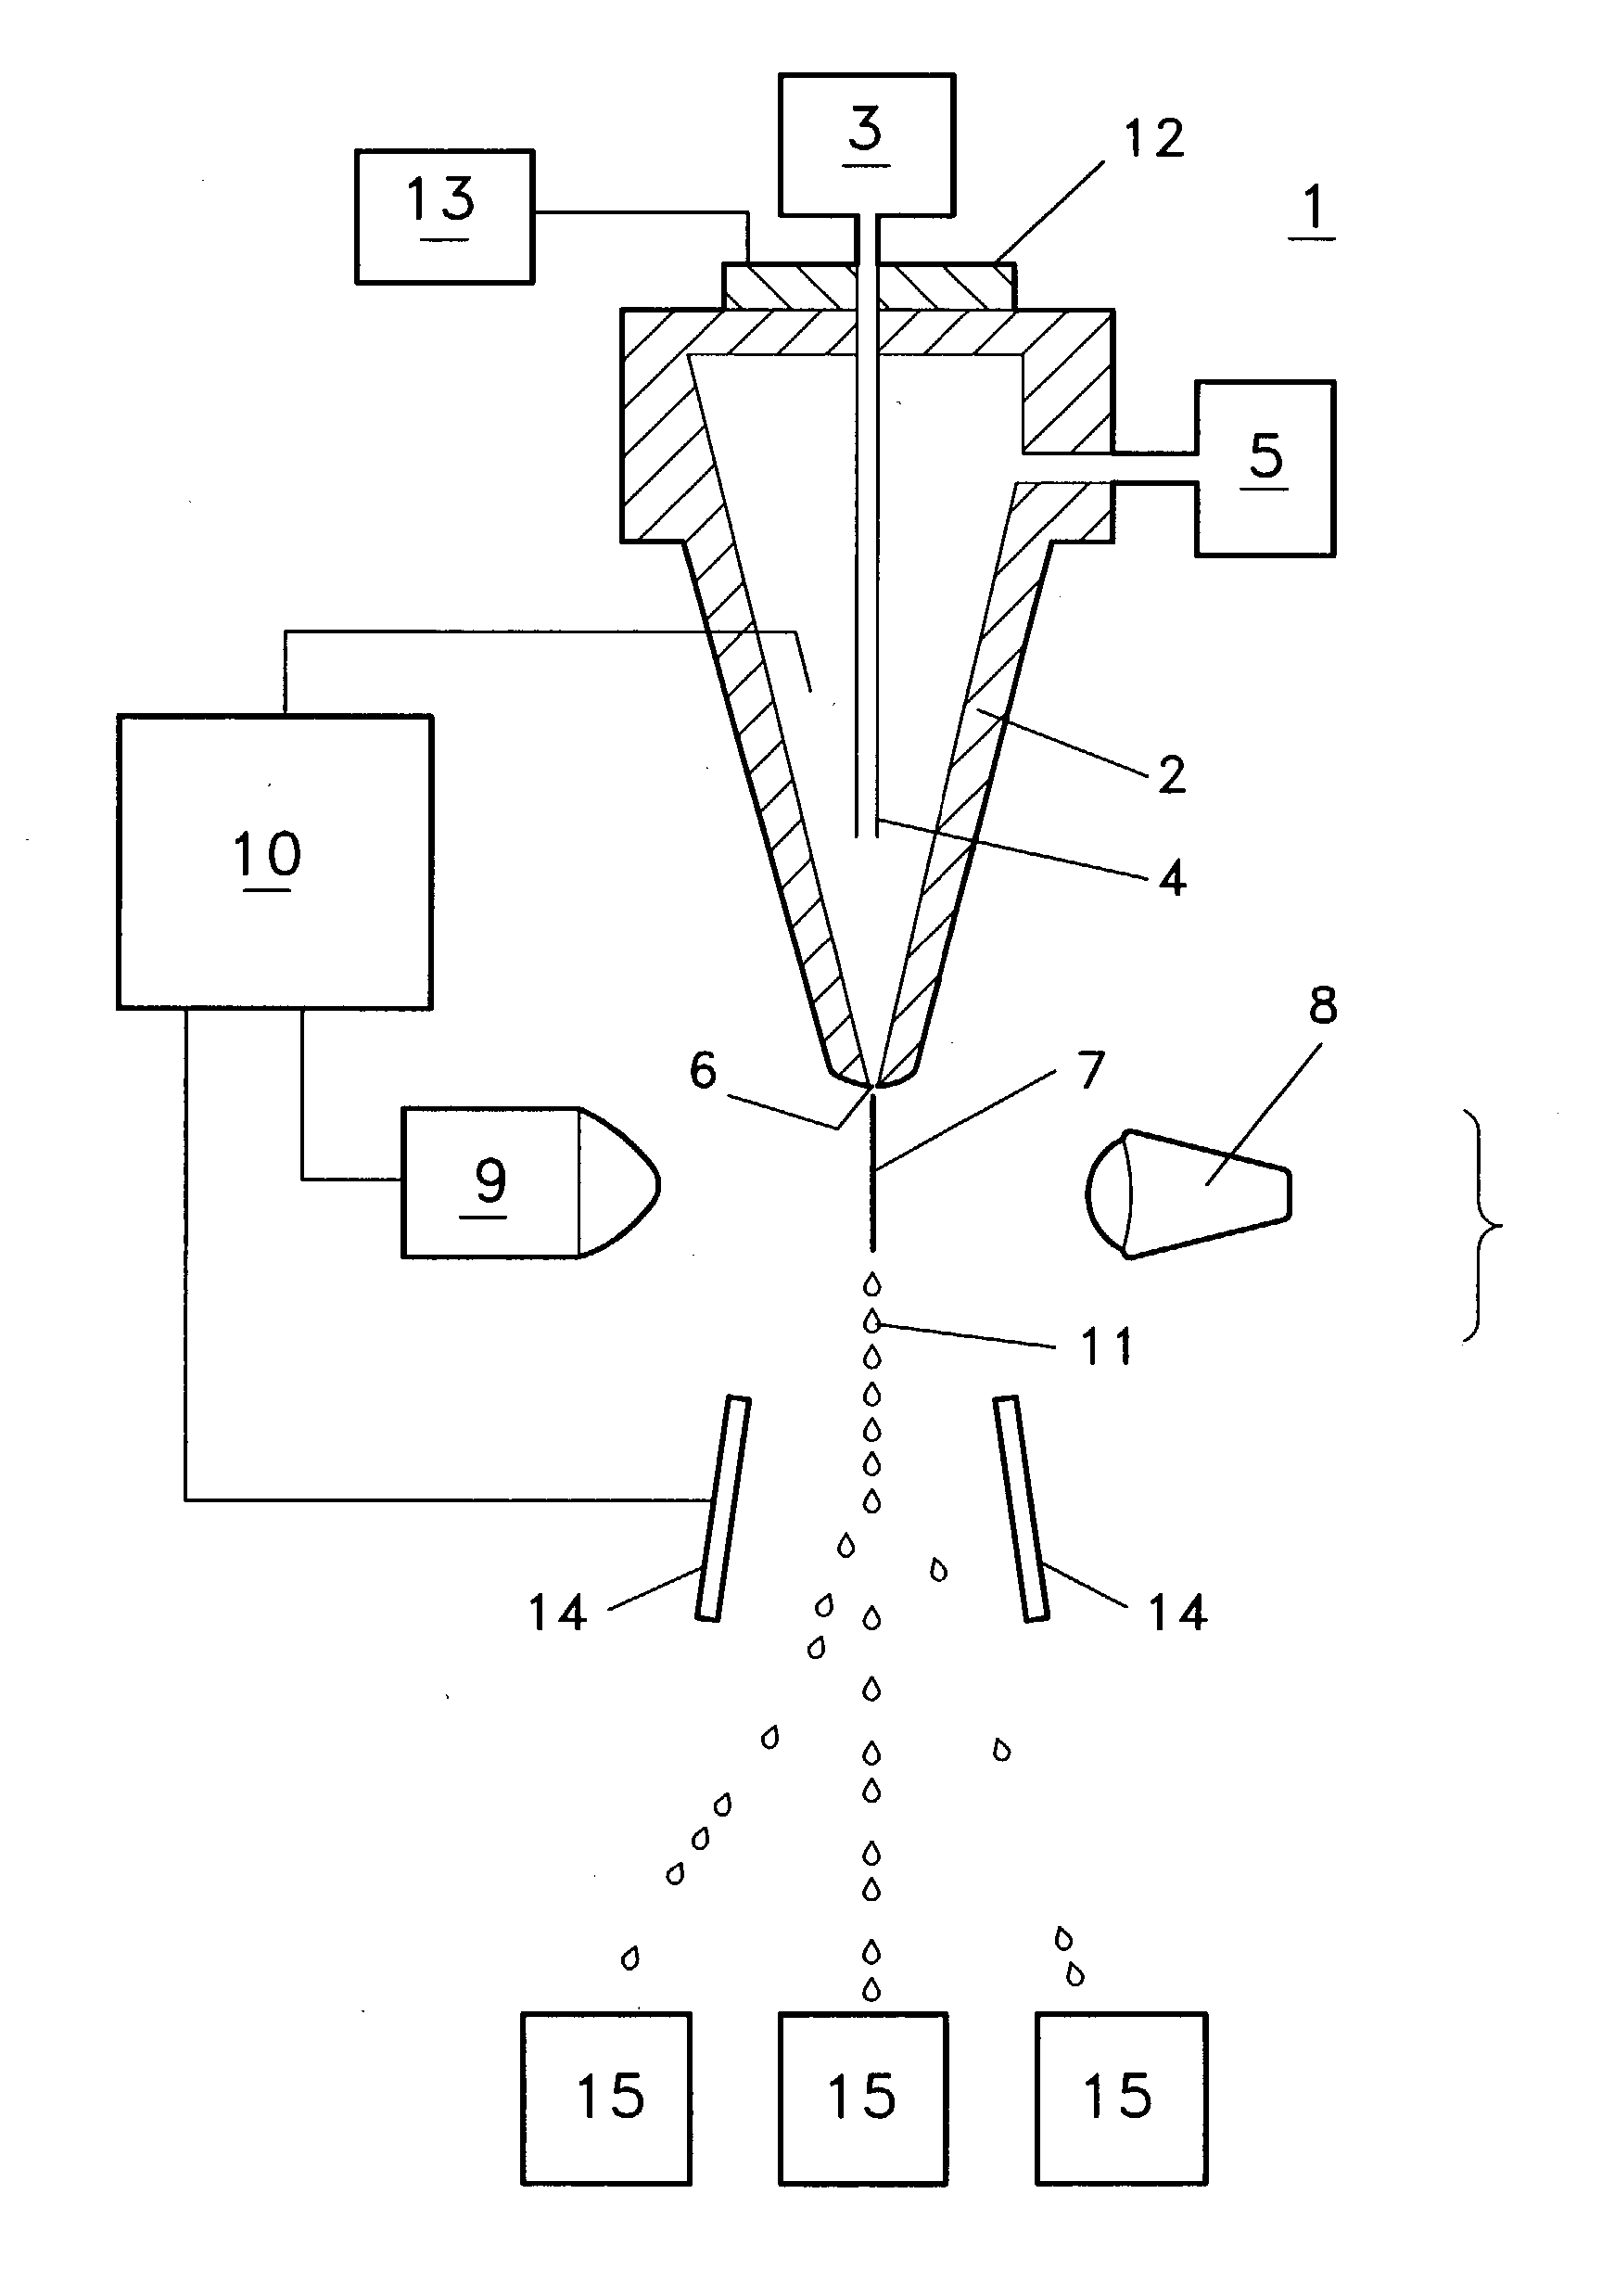 Environmental containment system for a flow cytometer